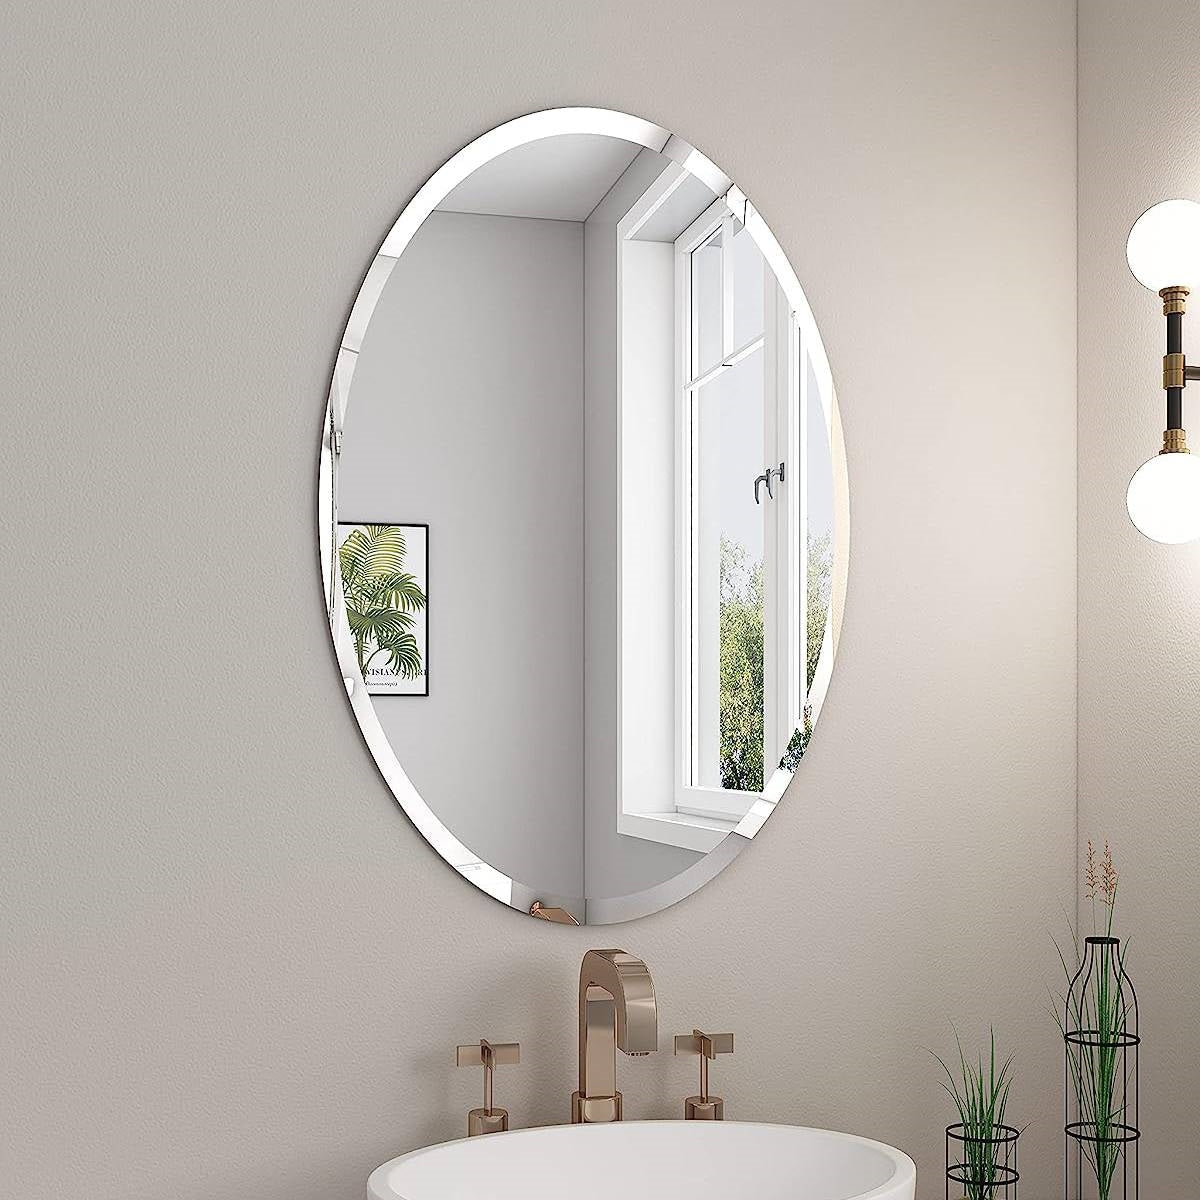 Accents > Mirrors - Oval Frameless 35-inch Beveled Bathroom Bedroom Living Room Vanity Wall Mirror